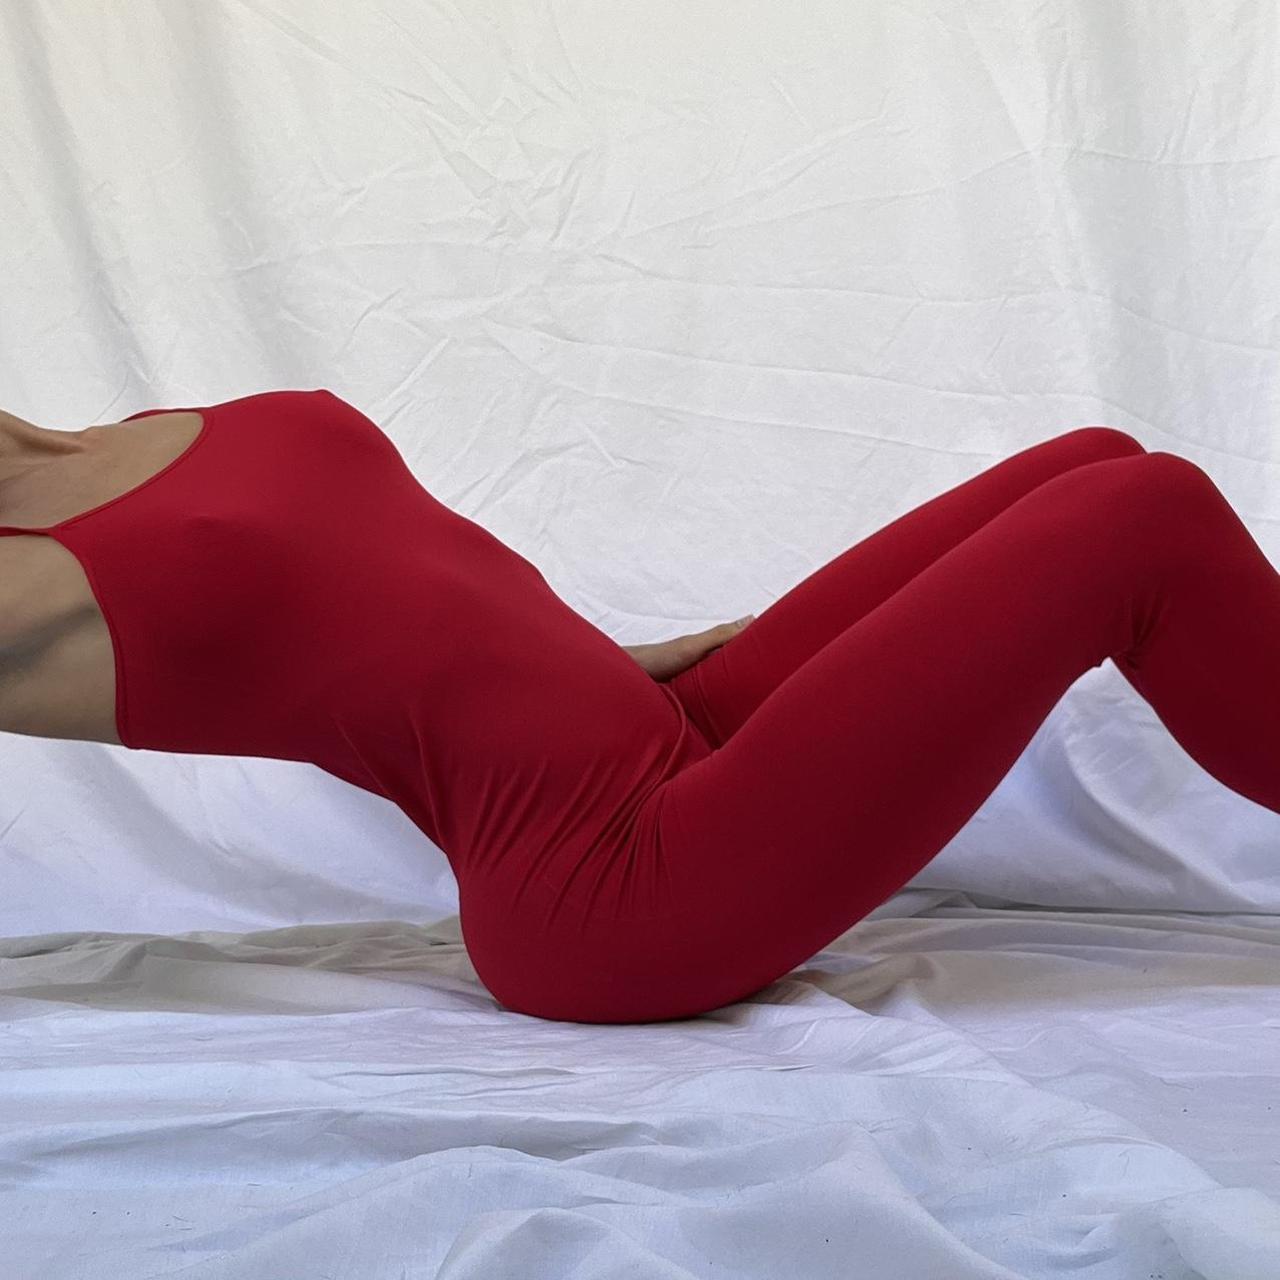 Product Image 2 - Red Jumpsuit (Brand: Bozzolo/tillys)

- Same